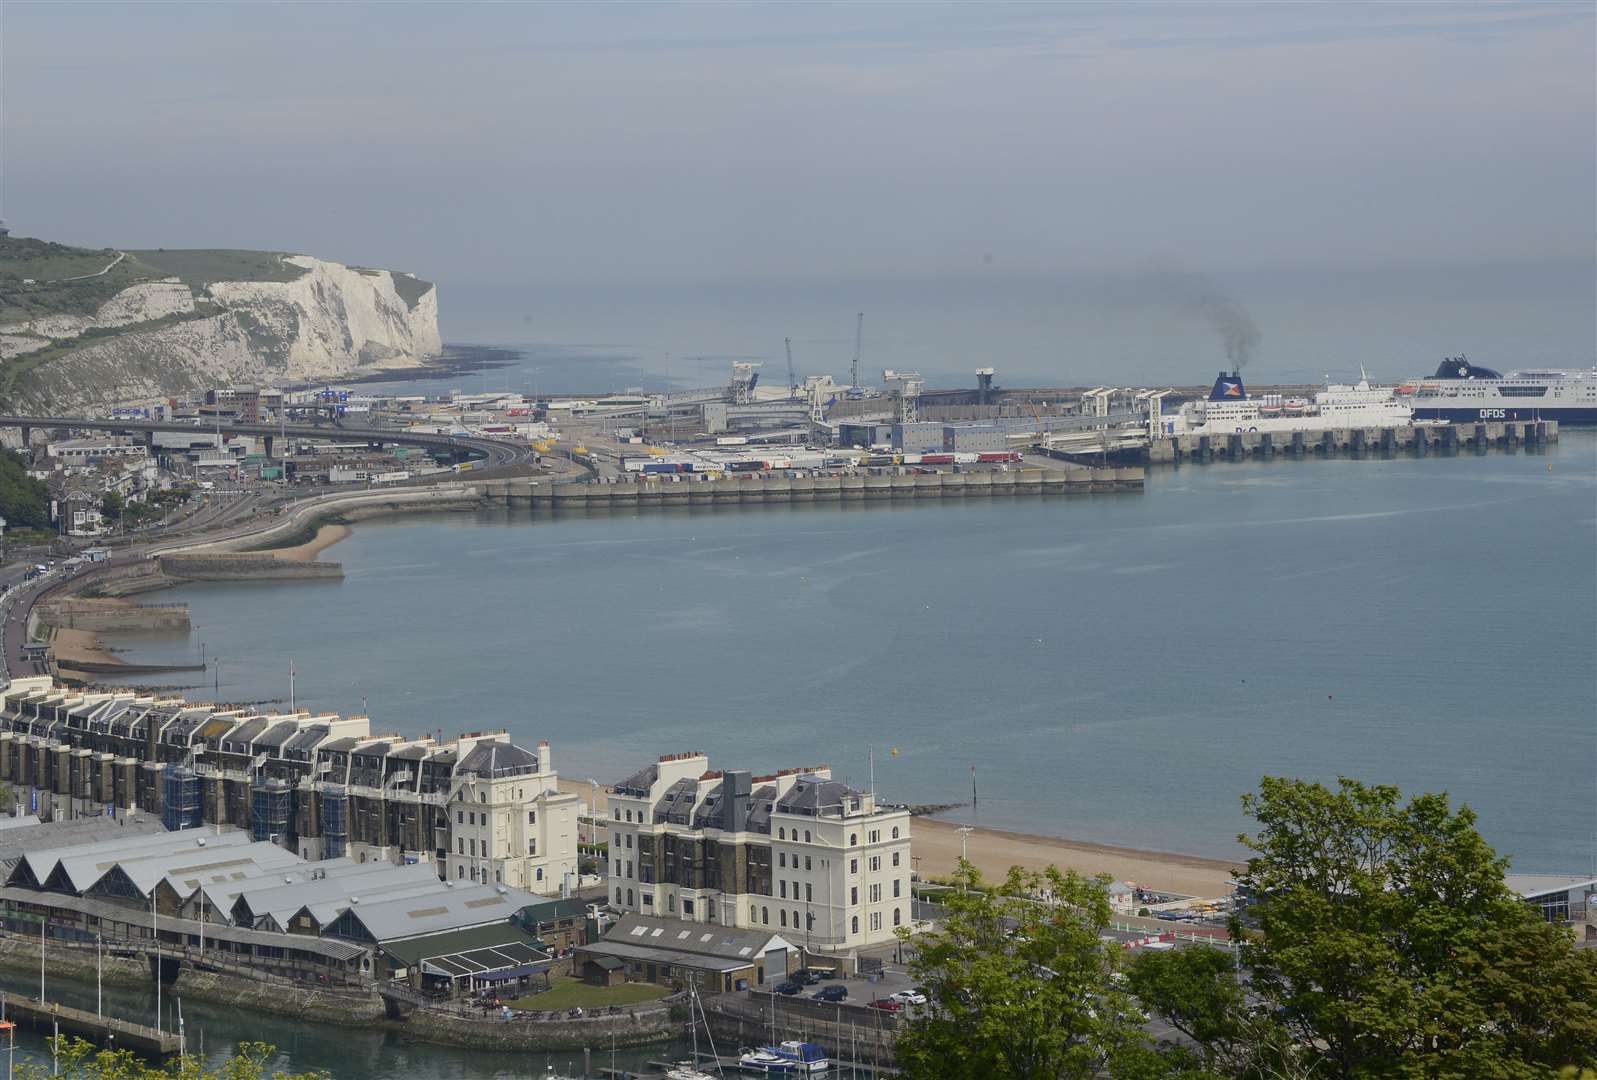 The two boatloads of migrants were brought to Dover this morning